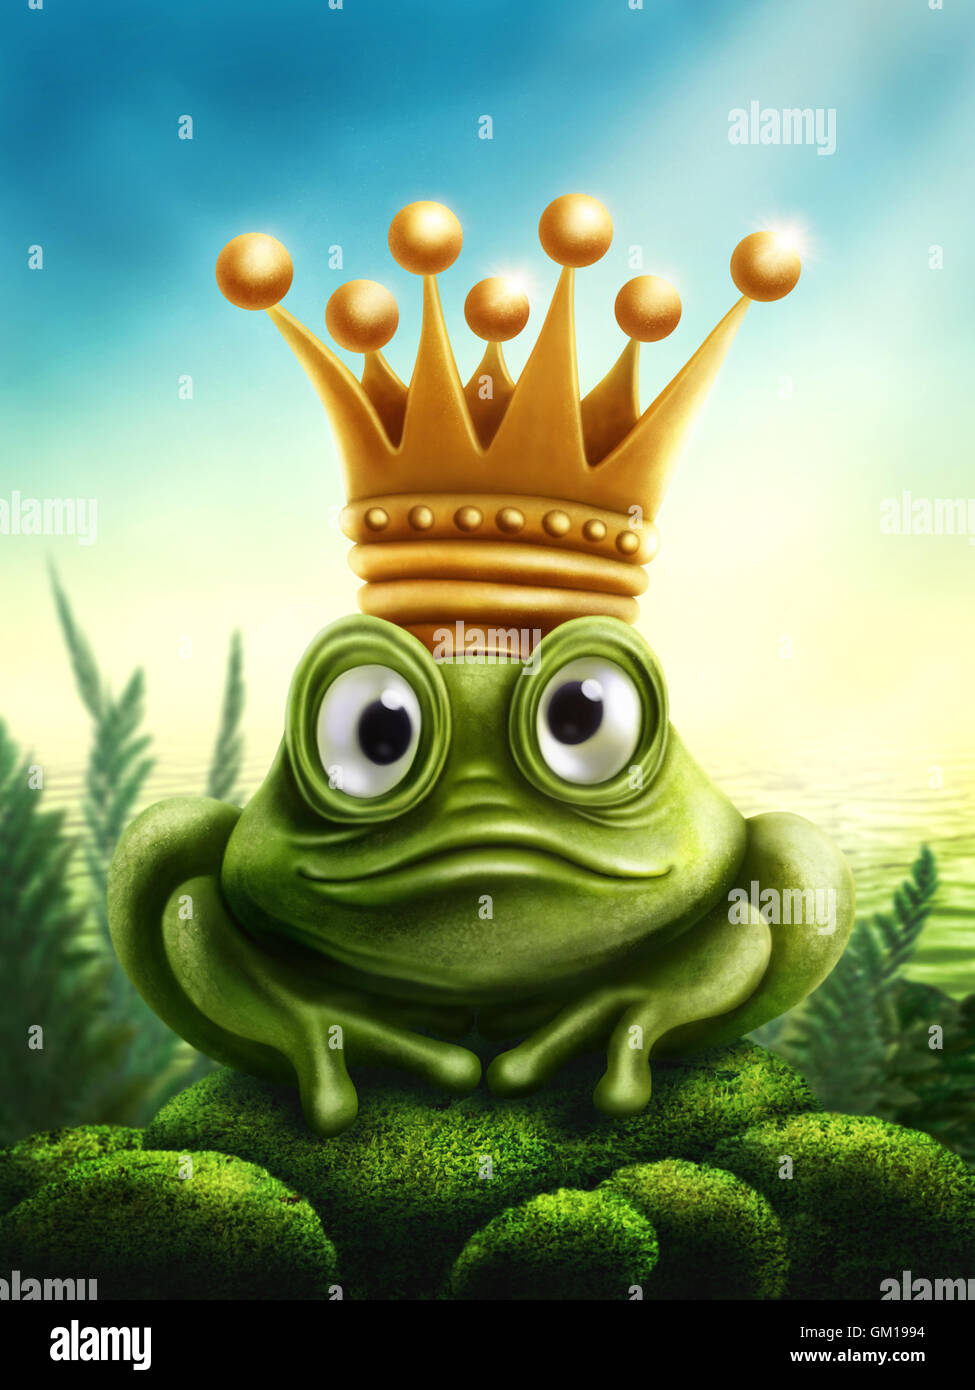 Illustration of frog prince with gold crown Stock Photo